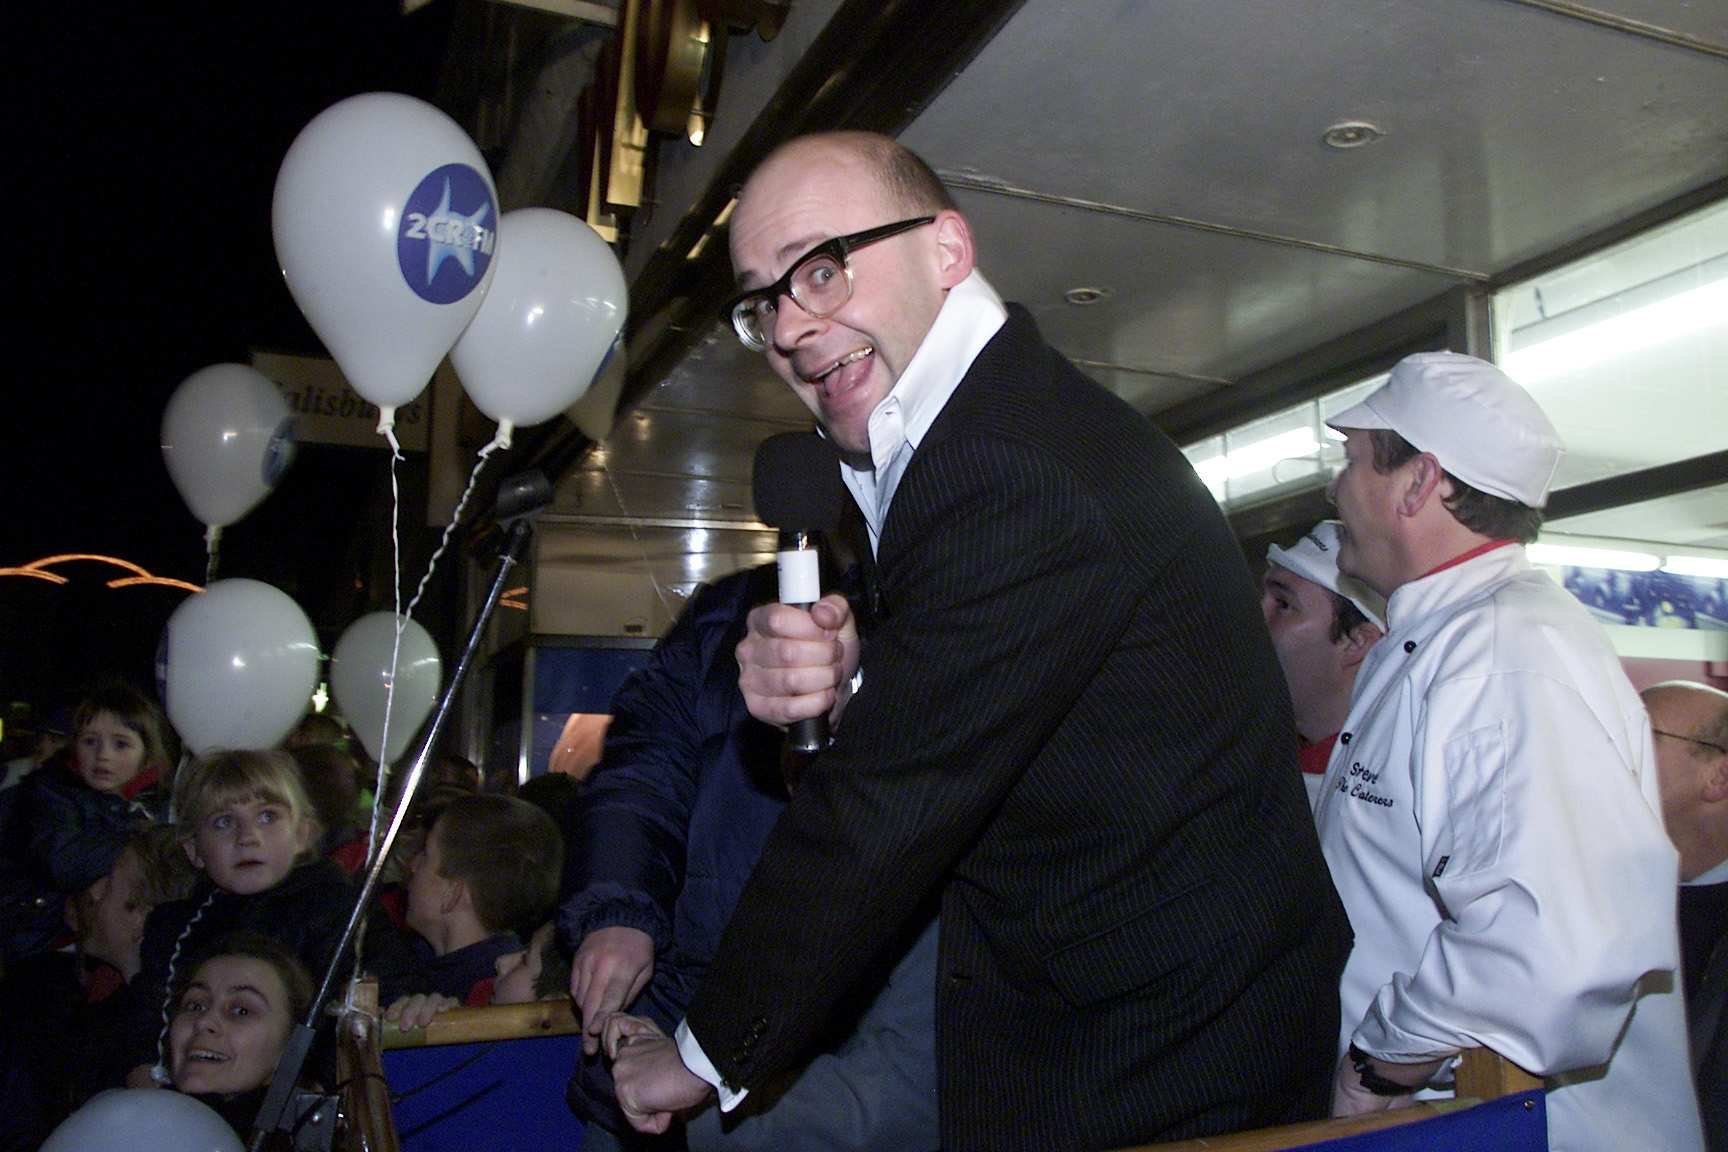 pLights1 - pic by Richard Crease - Comedian Harry Hill switches on the Christmas lights in poole High Street